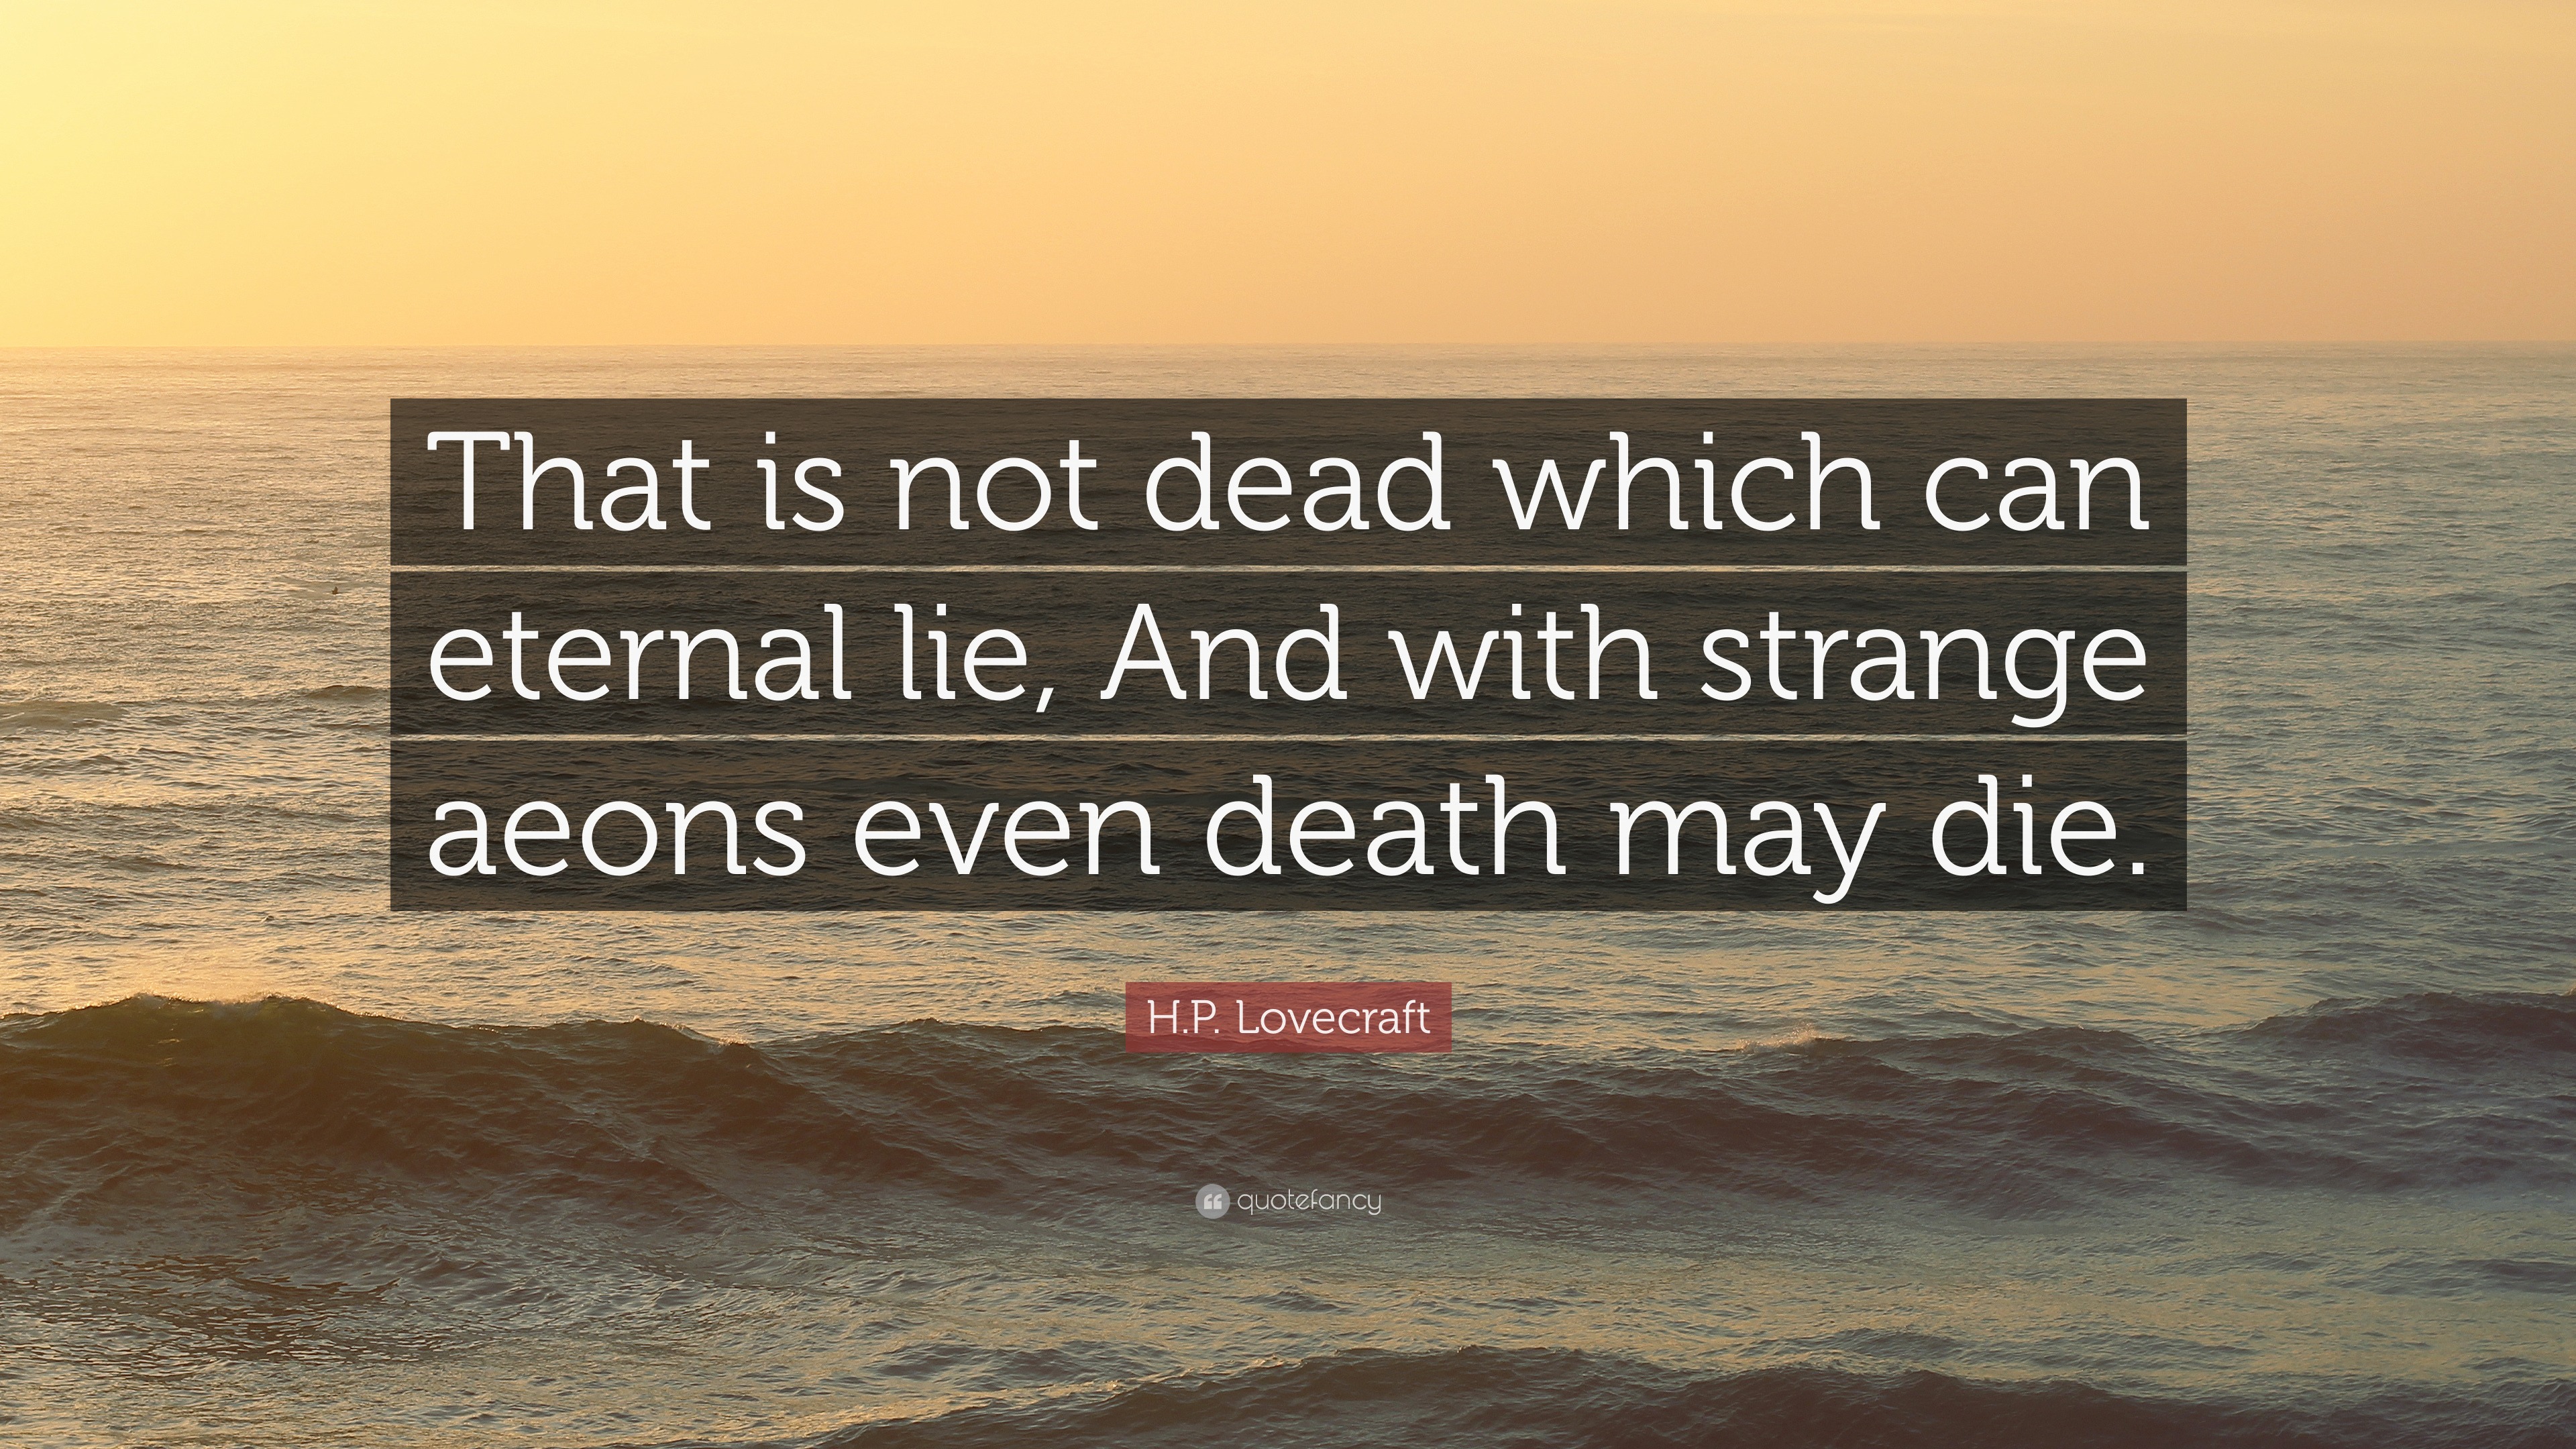 H.P. Lovecraft Quote: “That is not dead which can eternal lie, And with